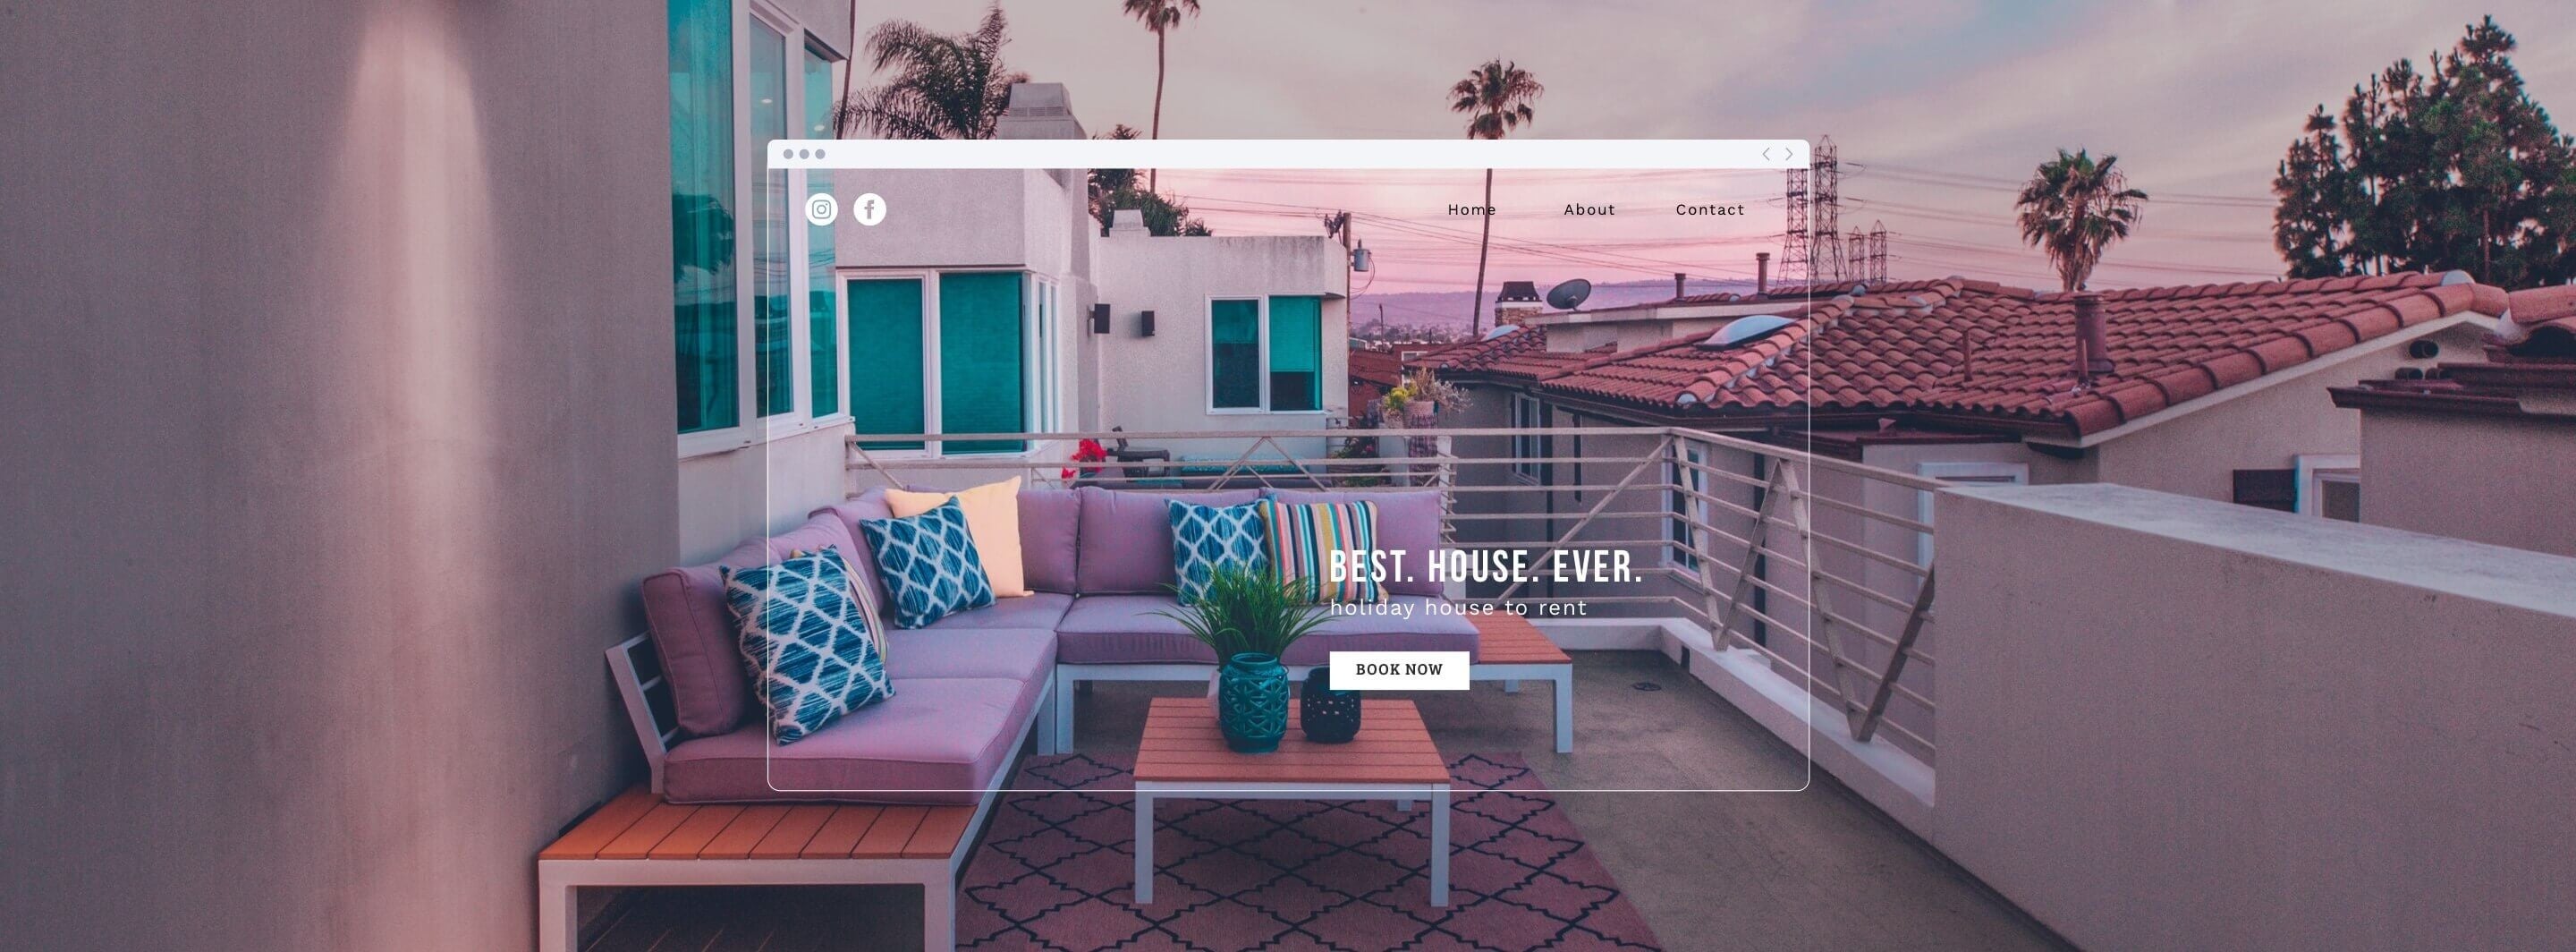 A vacation rental homepage built with Jimdo.